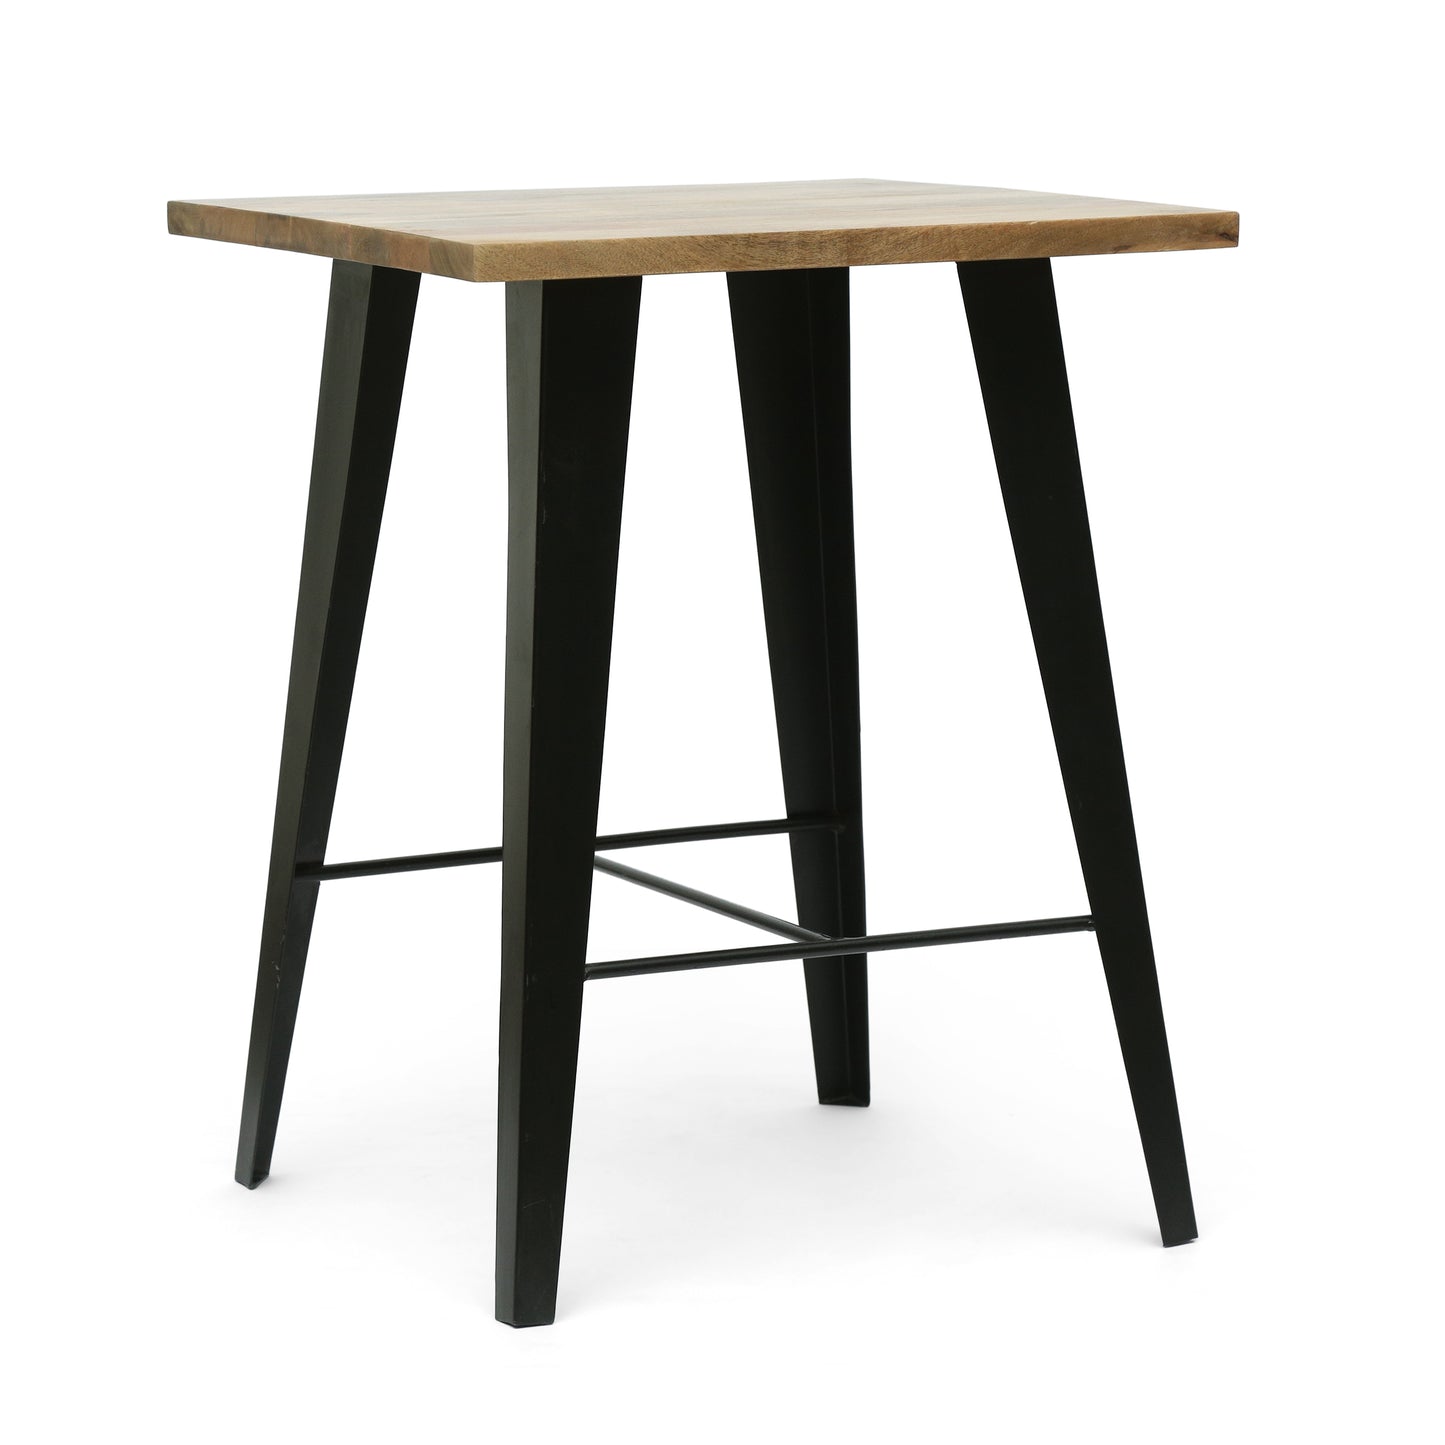 Muntz Handcrafted Modern Industrial Mango Wood Oversized Side Table, Natural and Black